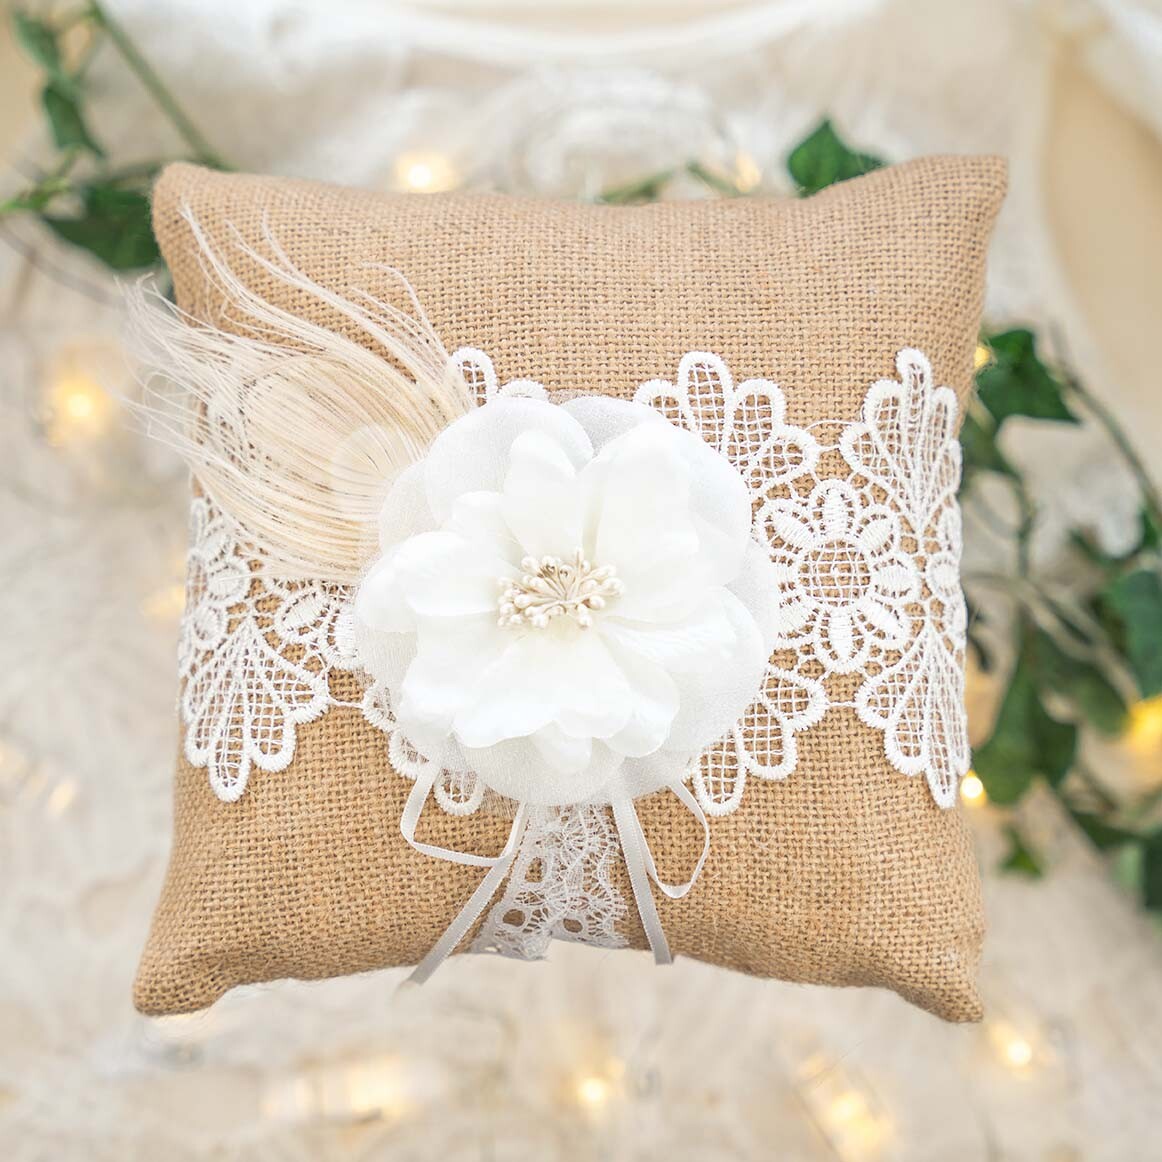 Amazon.com: Tangser Rring Bearer Pillow, Wedding Ring Pillow for Ceremony,  Personalize Wedding Rings Holders with Beautiful Lace & Flower 8.2